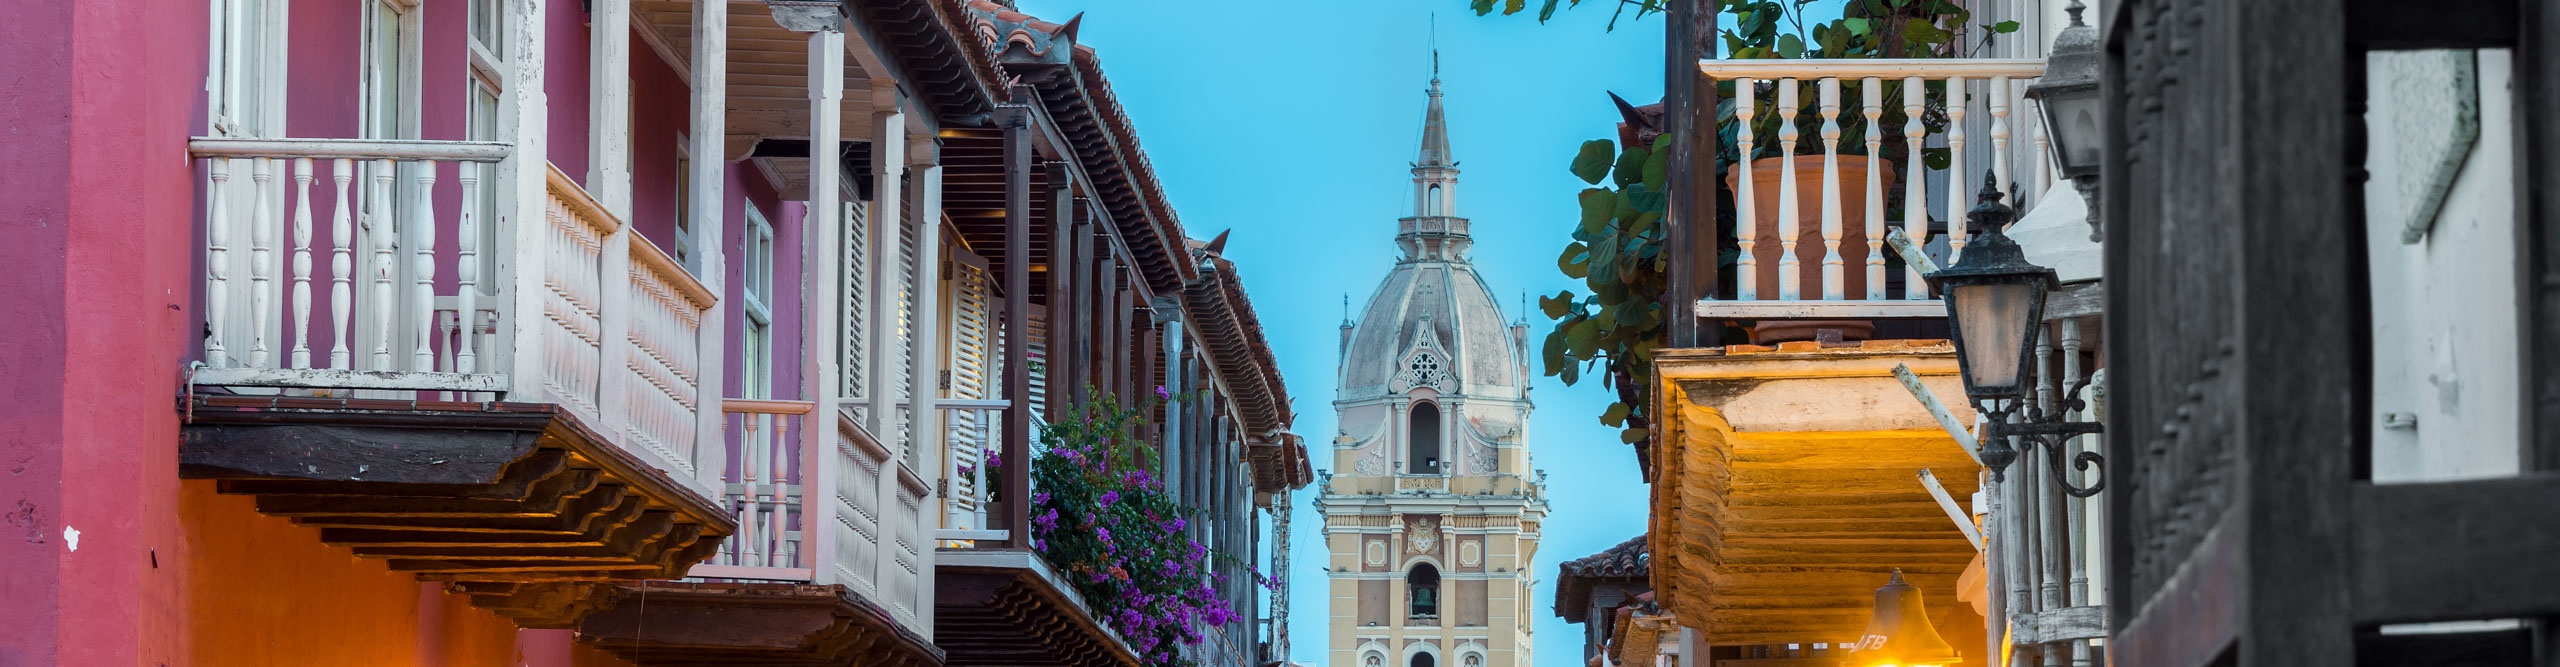 Colourful streets of Cartagena, Colombia